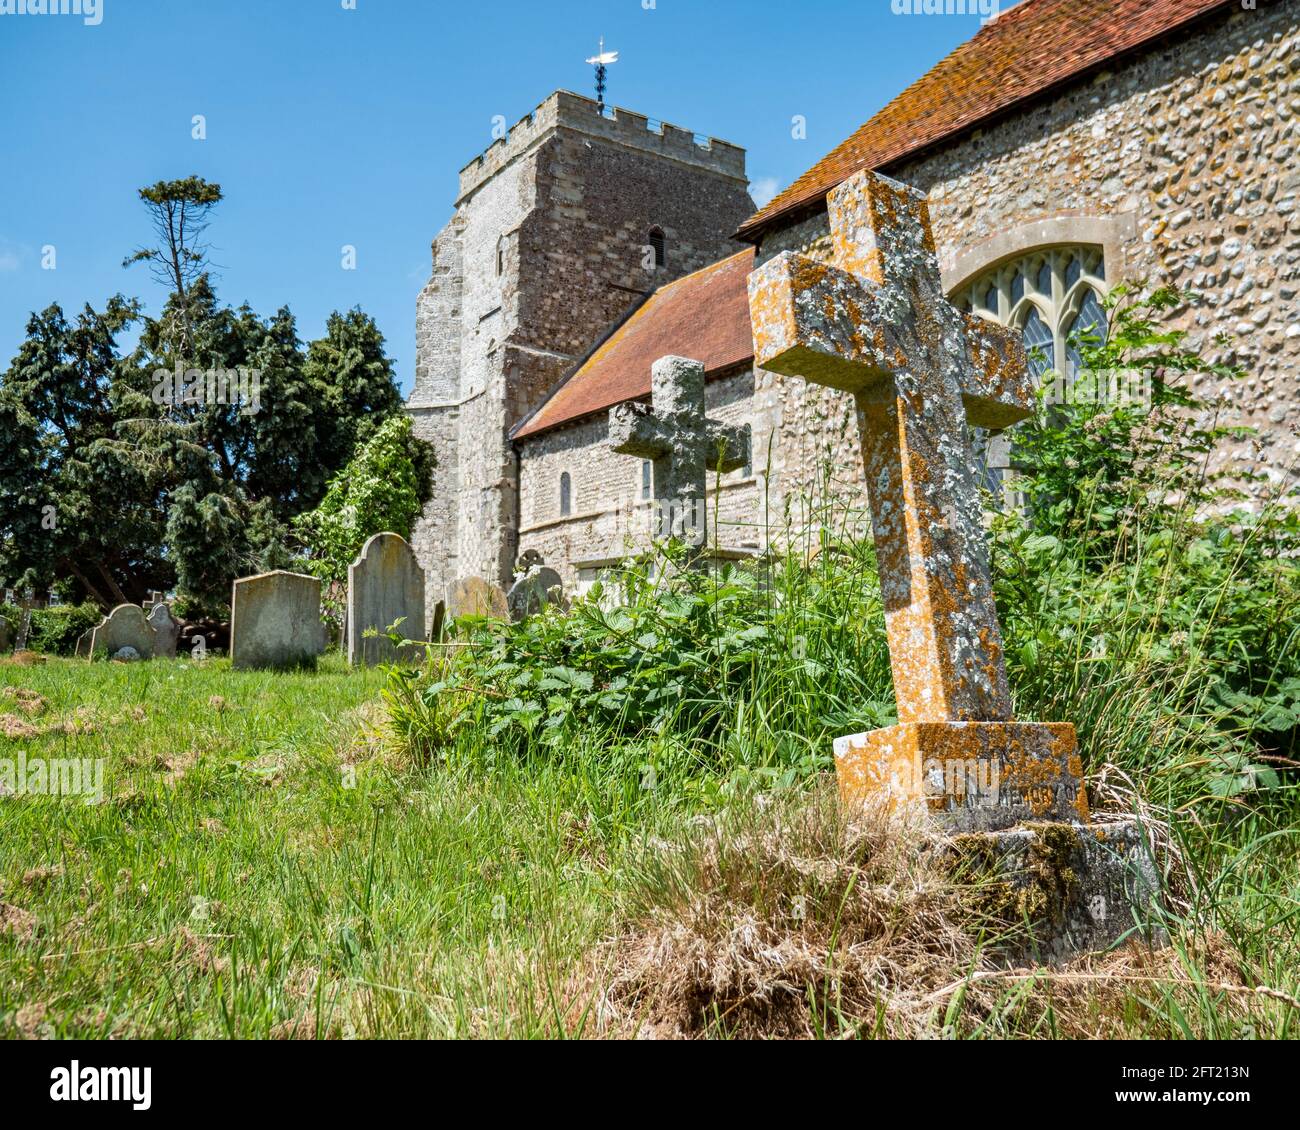 English Church Yard. A view of a typical English church and overgrown cemetery with the foreground dominated by a long forgotten crucifix grave stone. Stock Photo